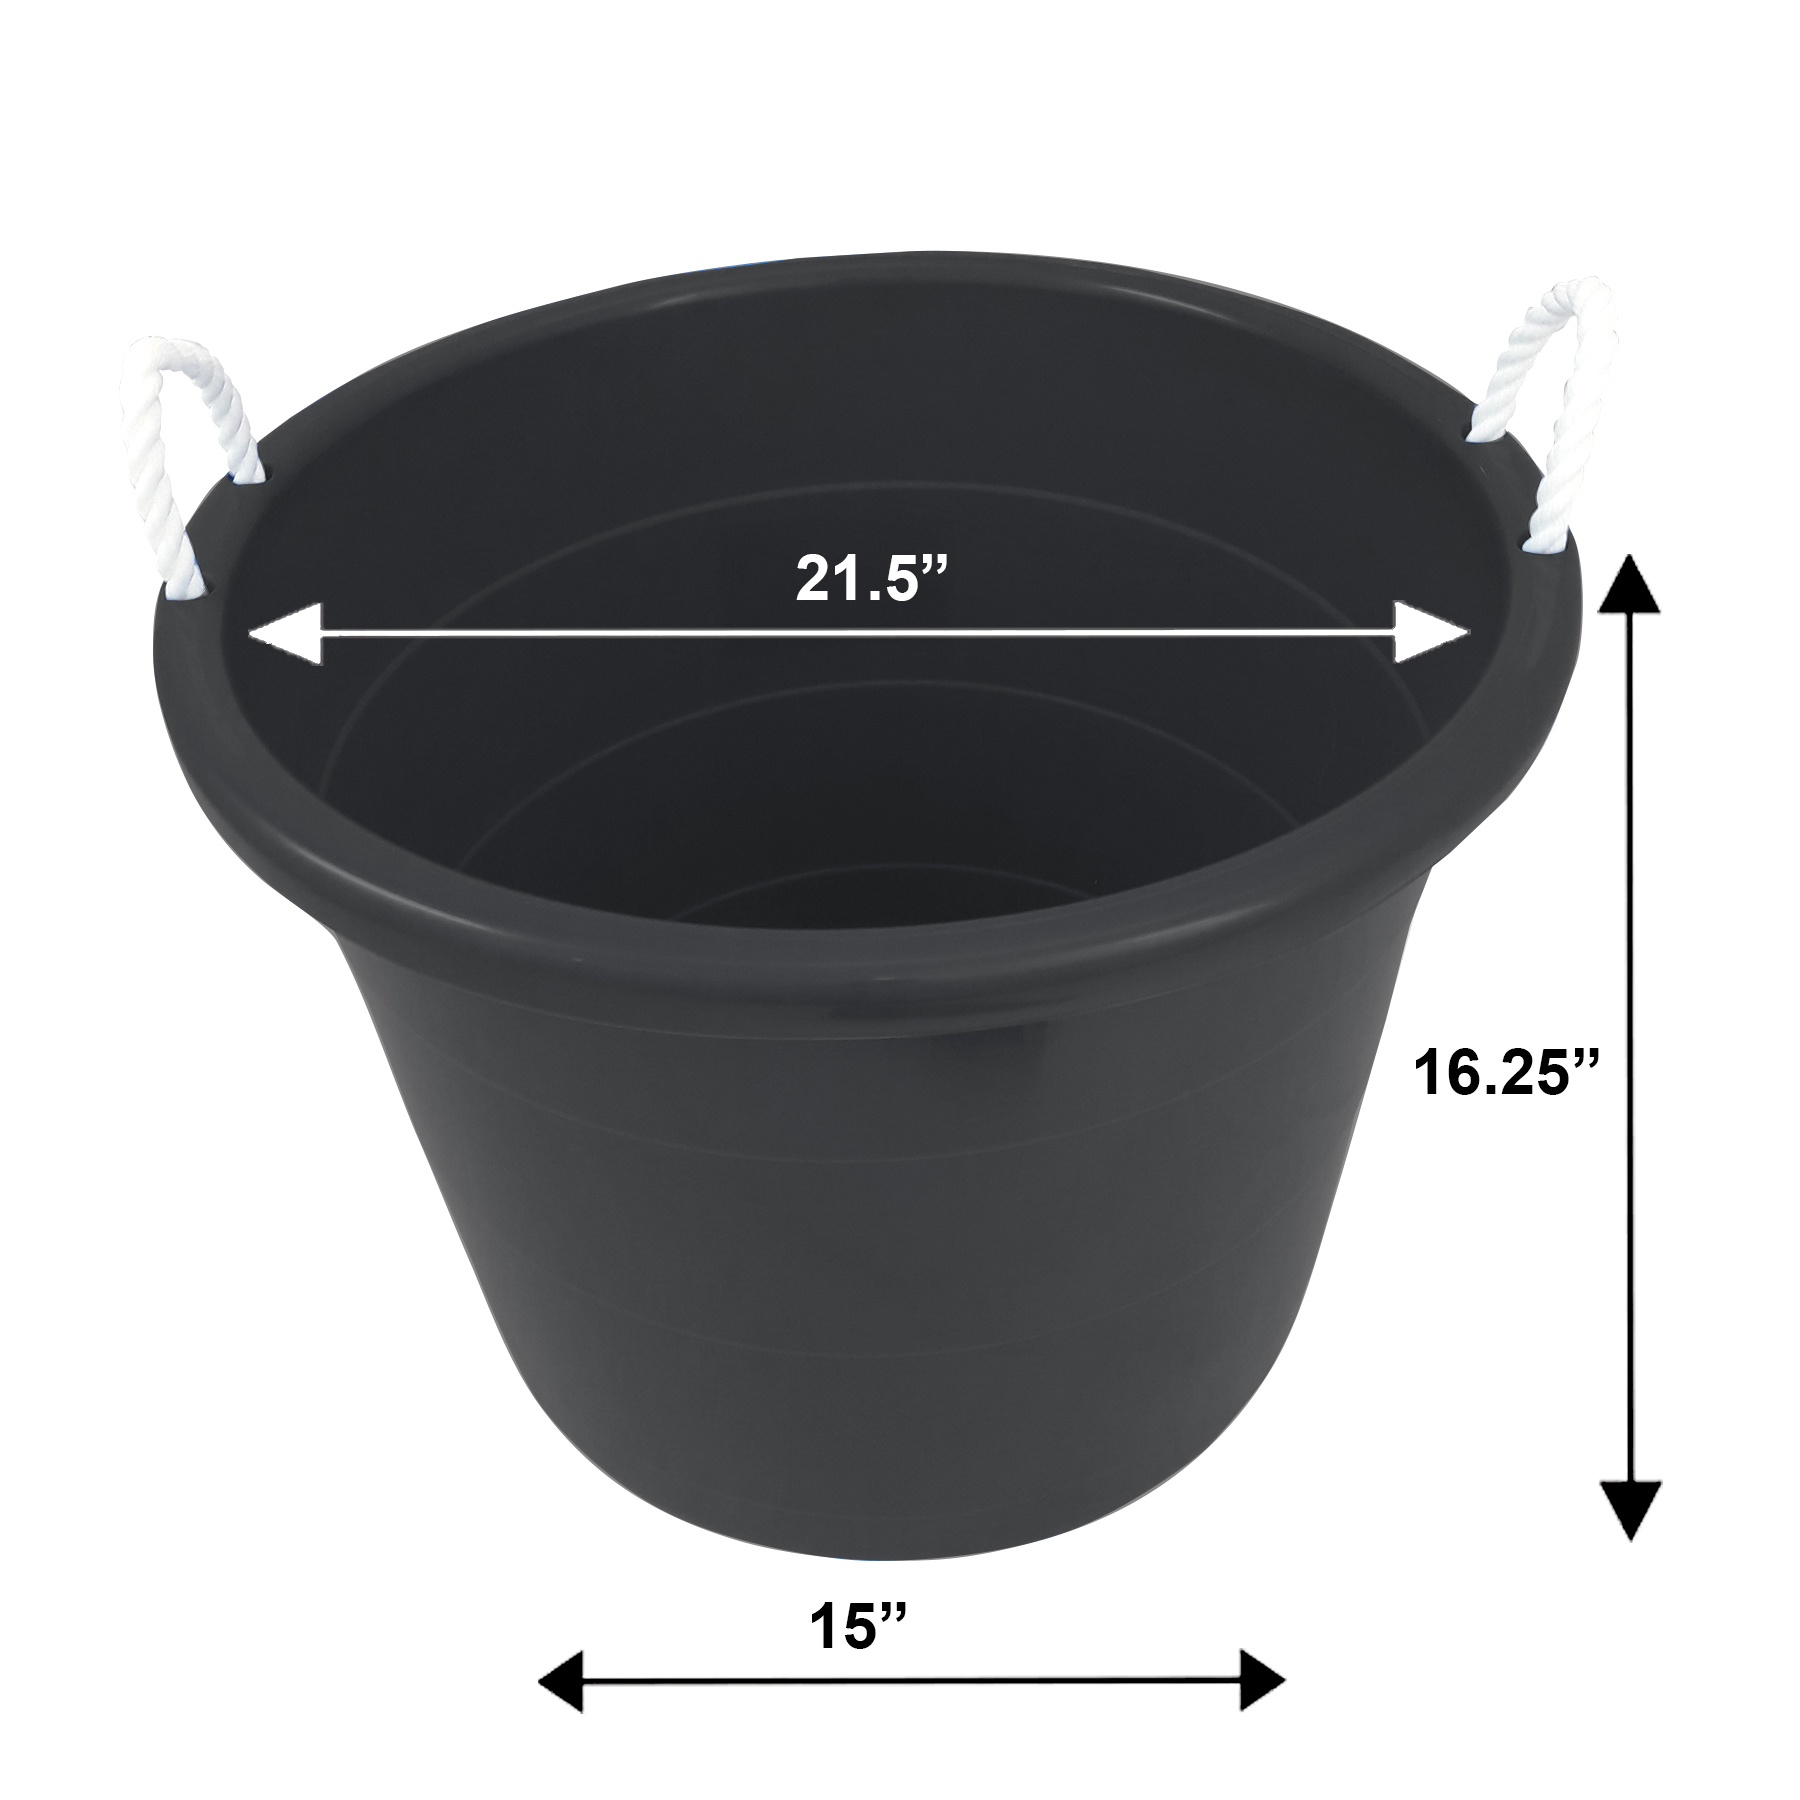 Mainstays 17-Gallon Plastic Utility Tub with Rope Handles, Black, Set of 2 - image 2 of 4